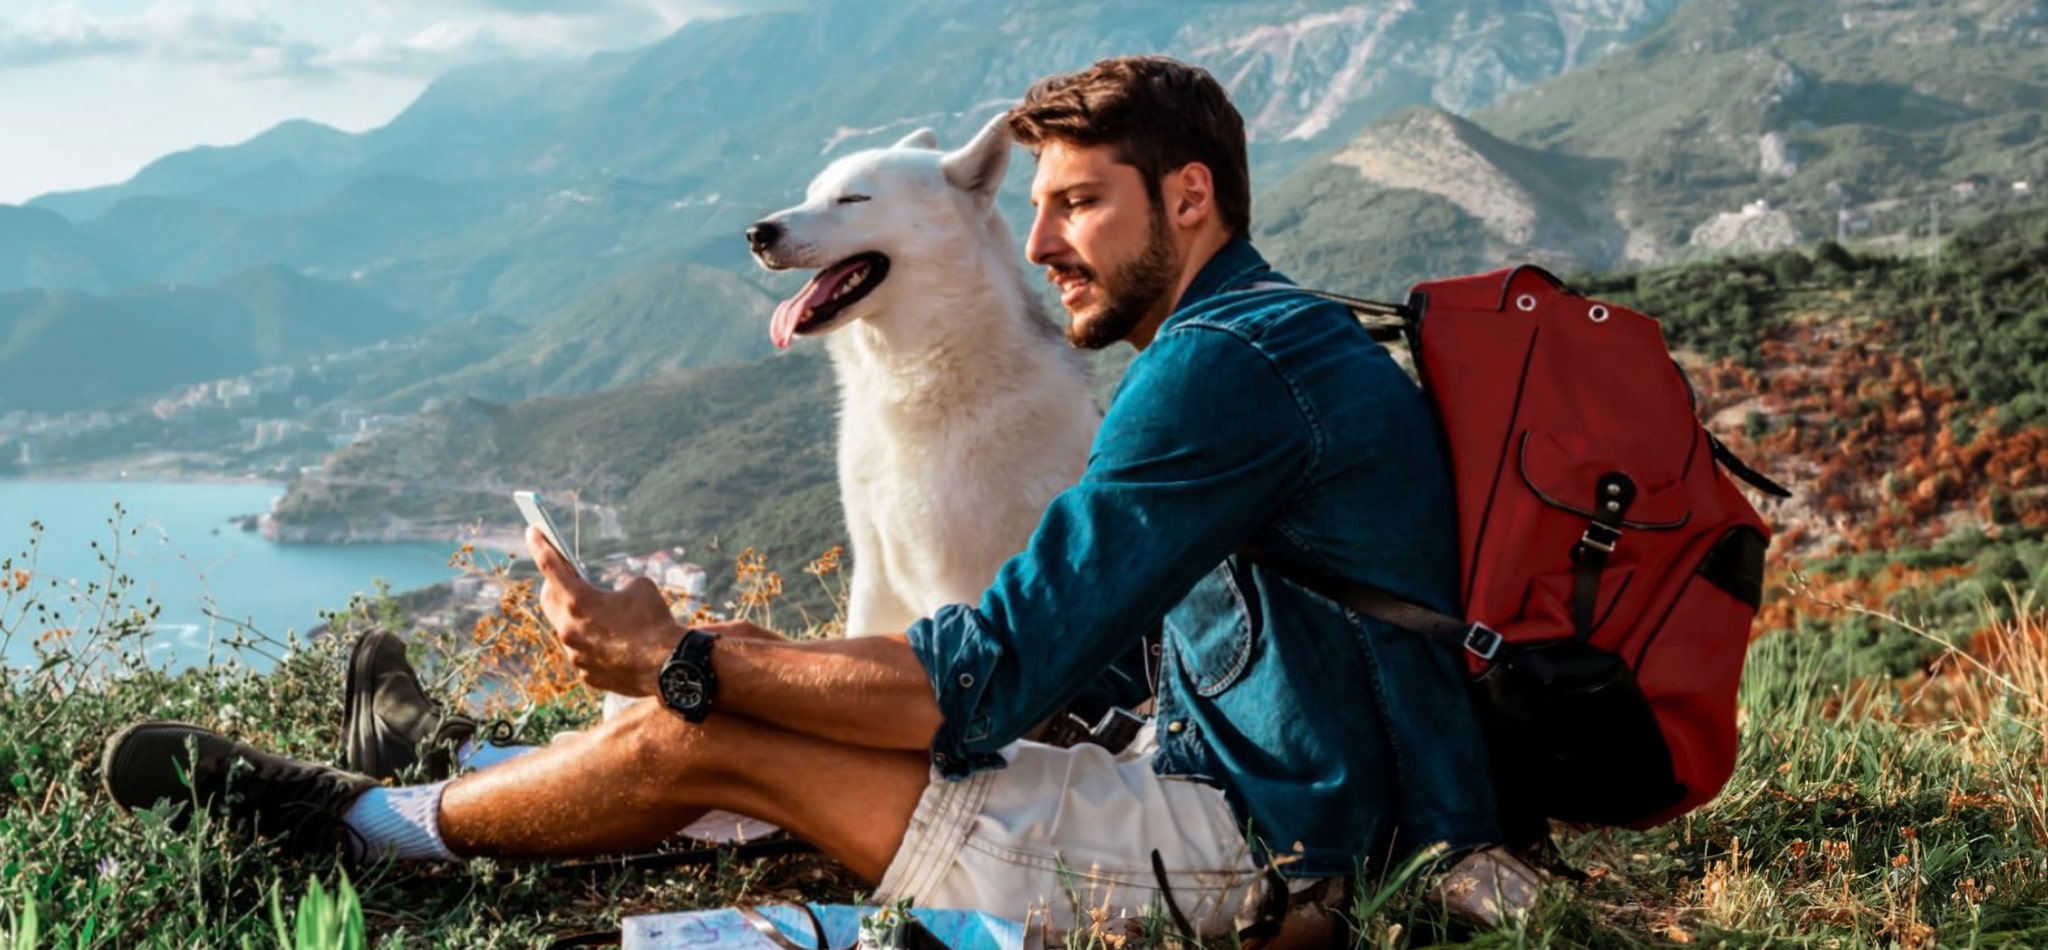 Man taking a selfie with his dog outdoors on a mountain cliff